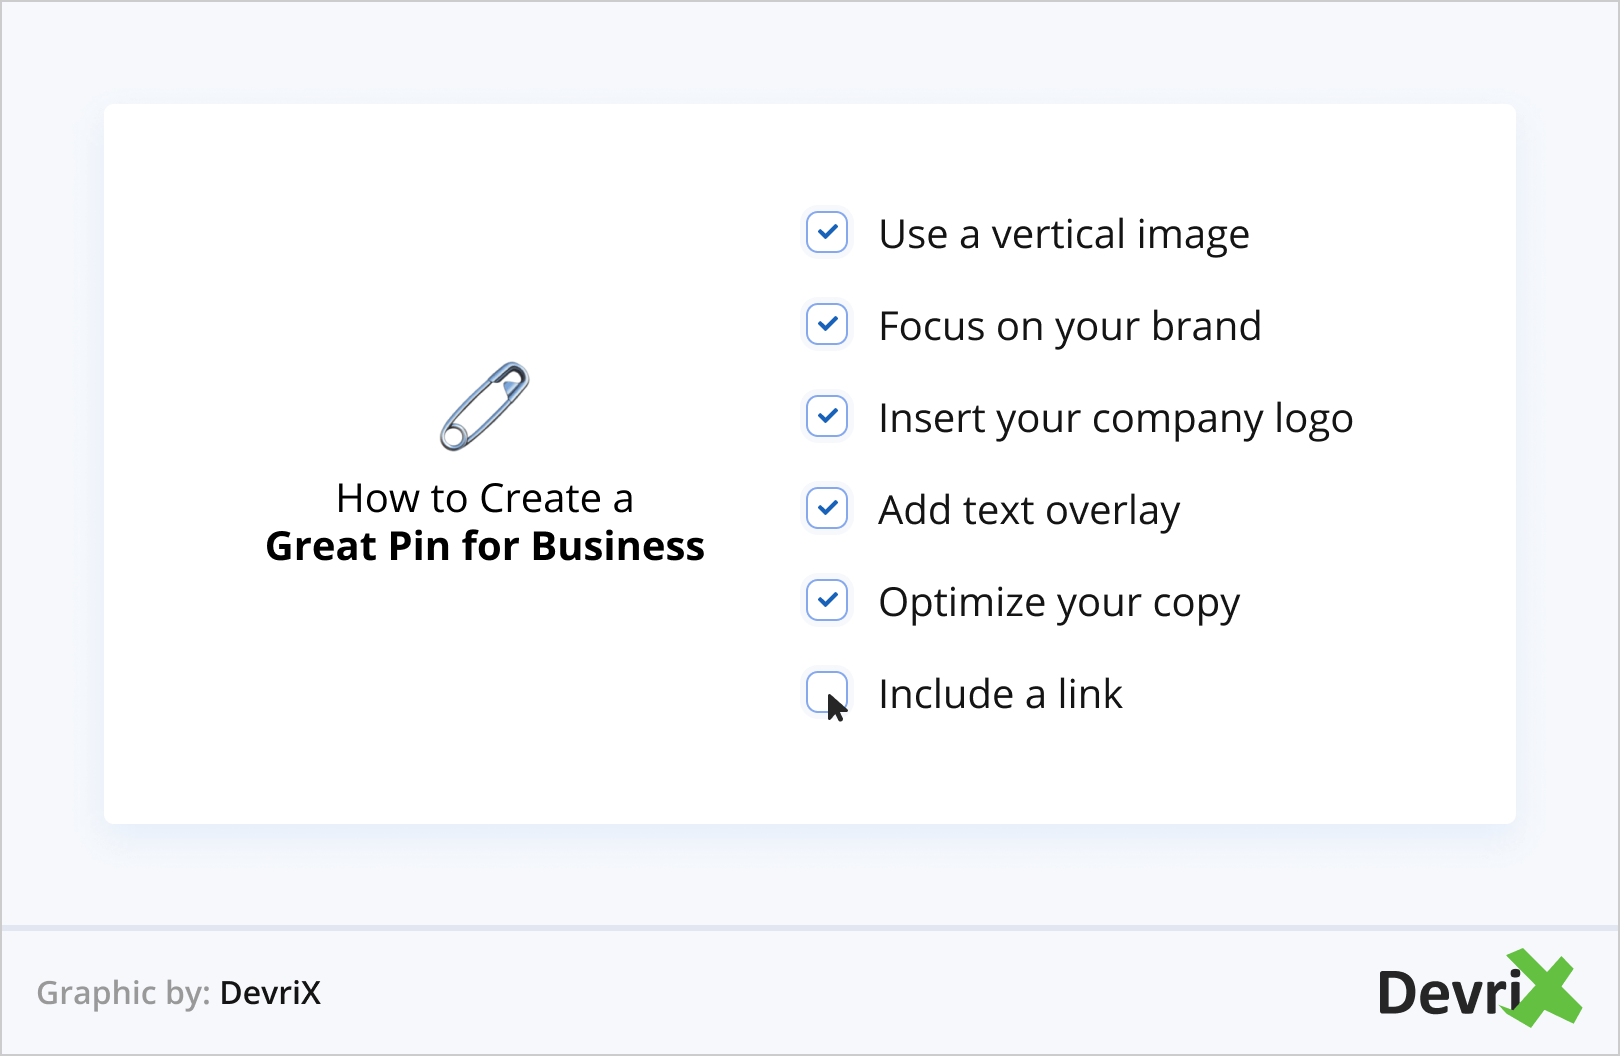 How to Create a Great Pin for Business